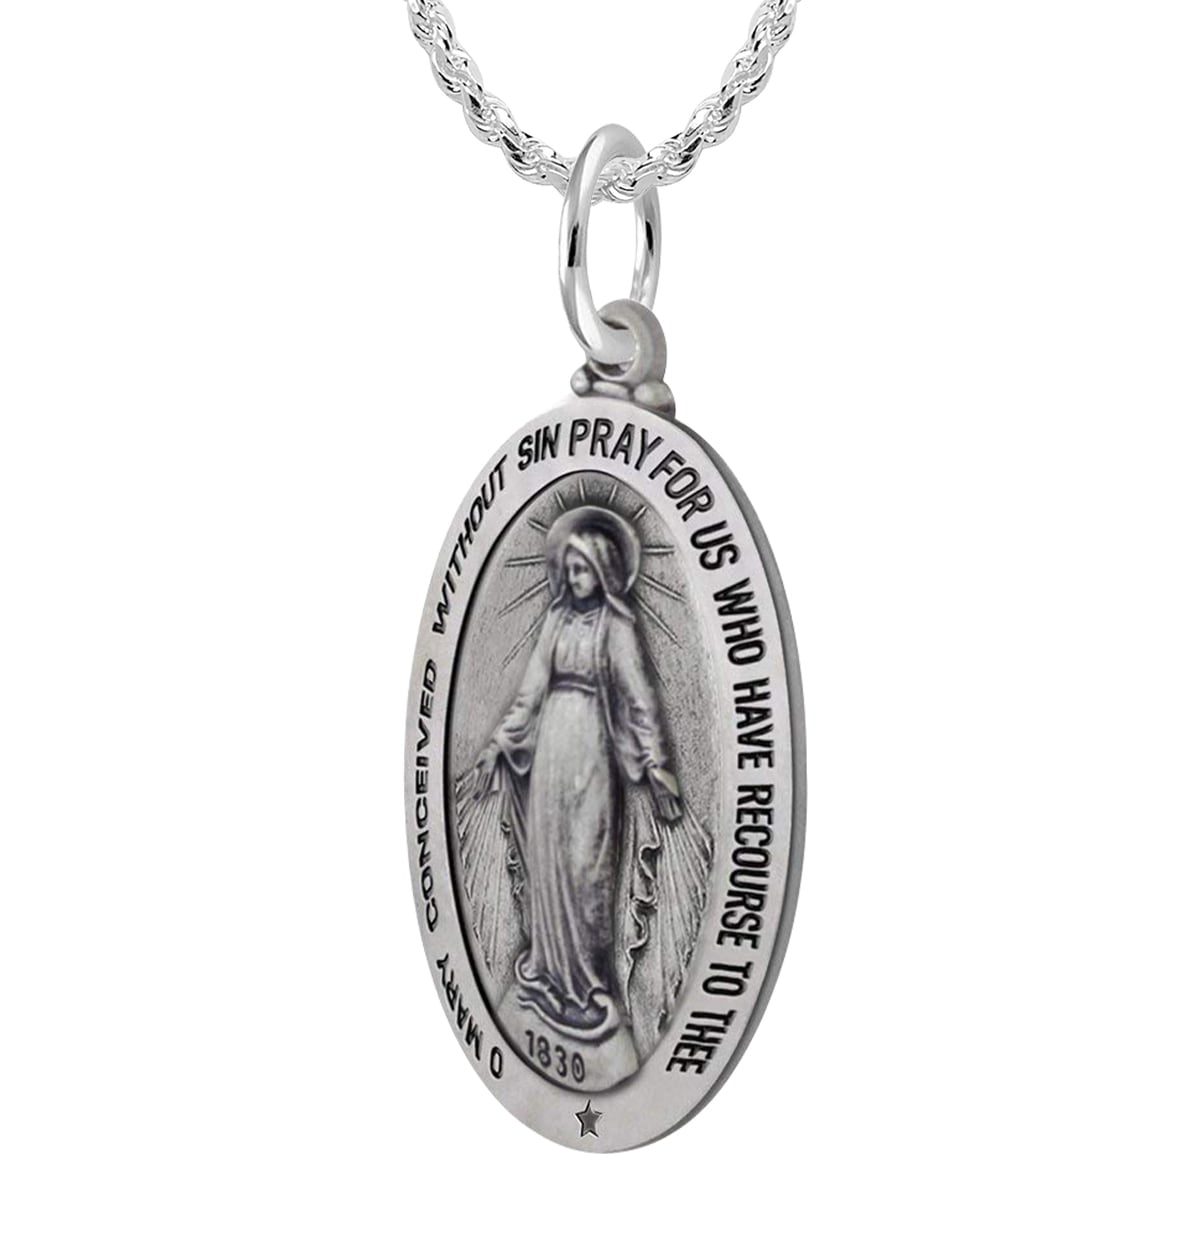 US Jewels And Gems New 925 Sterling Silver 1.5 Oval Miraculous Virgin Mary Antique Finish Pendant Necklace